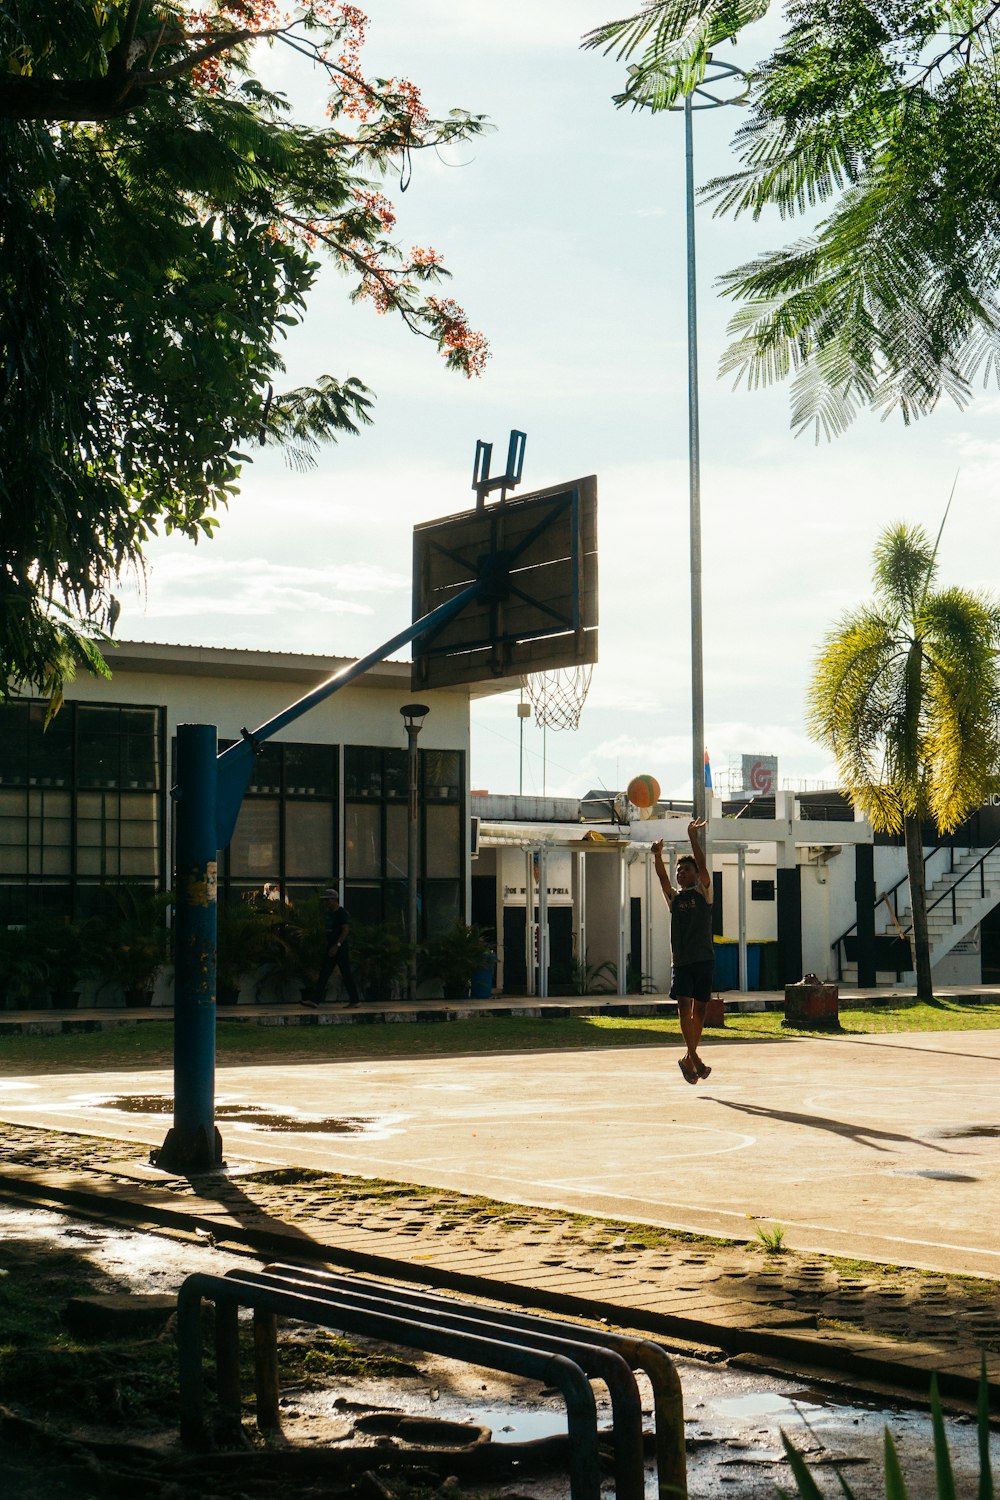 a man is playing basketball on a basketball court